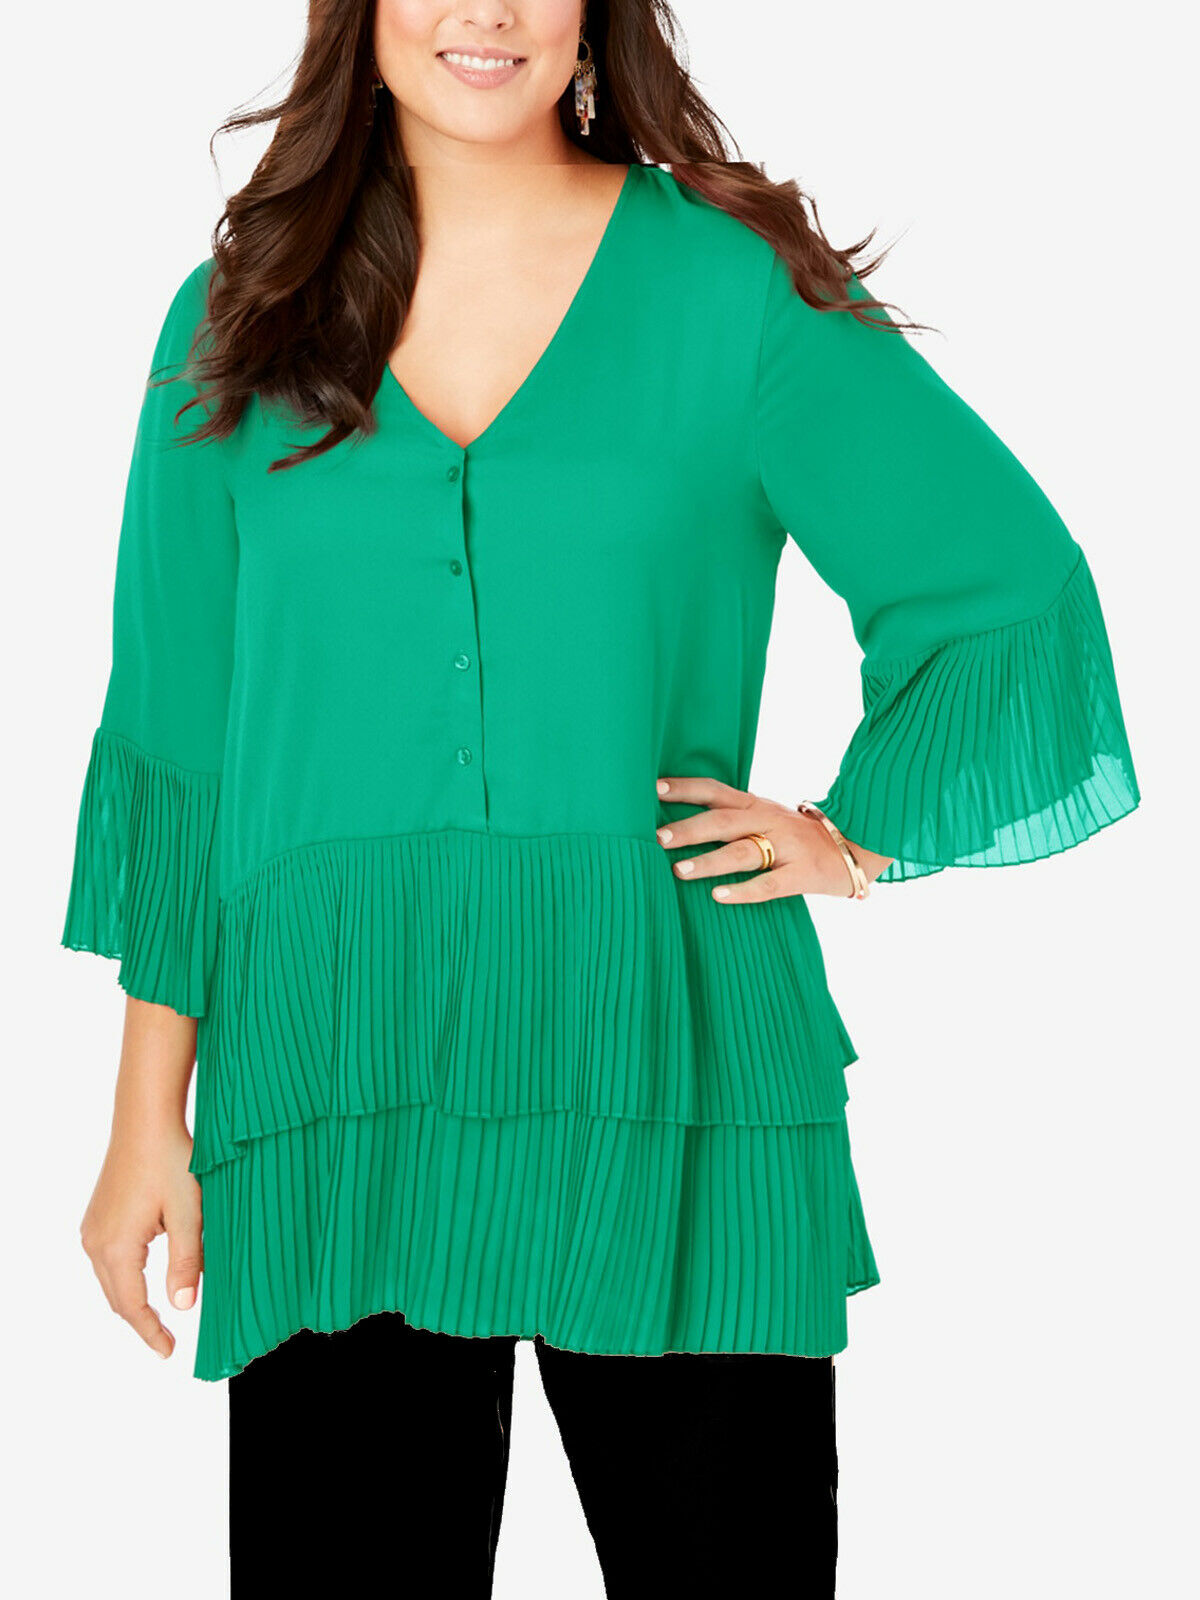 Roamans Tunic Blouse Green Tiered Layer Pleat V-Neck – Sizes 18 to